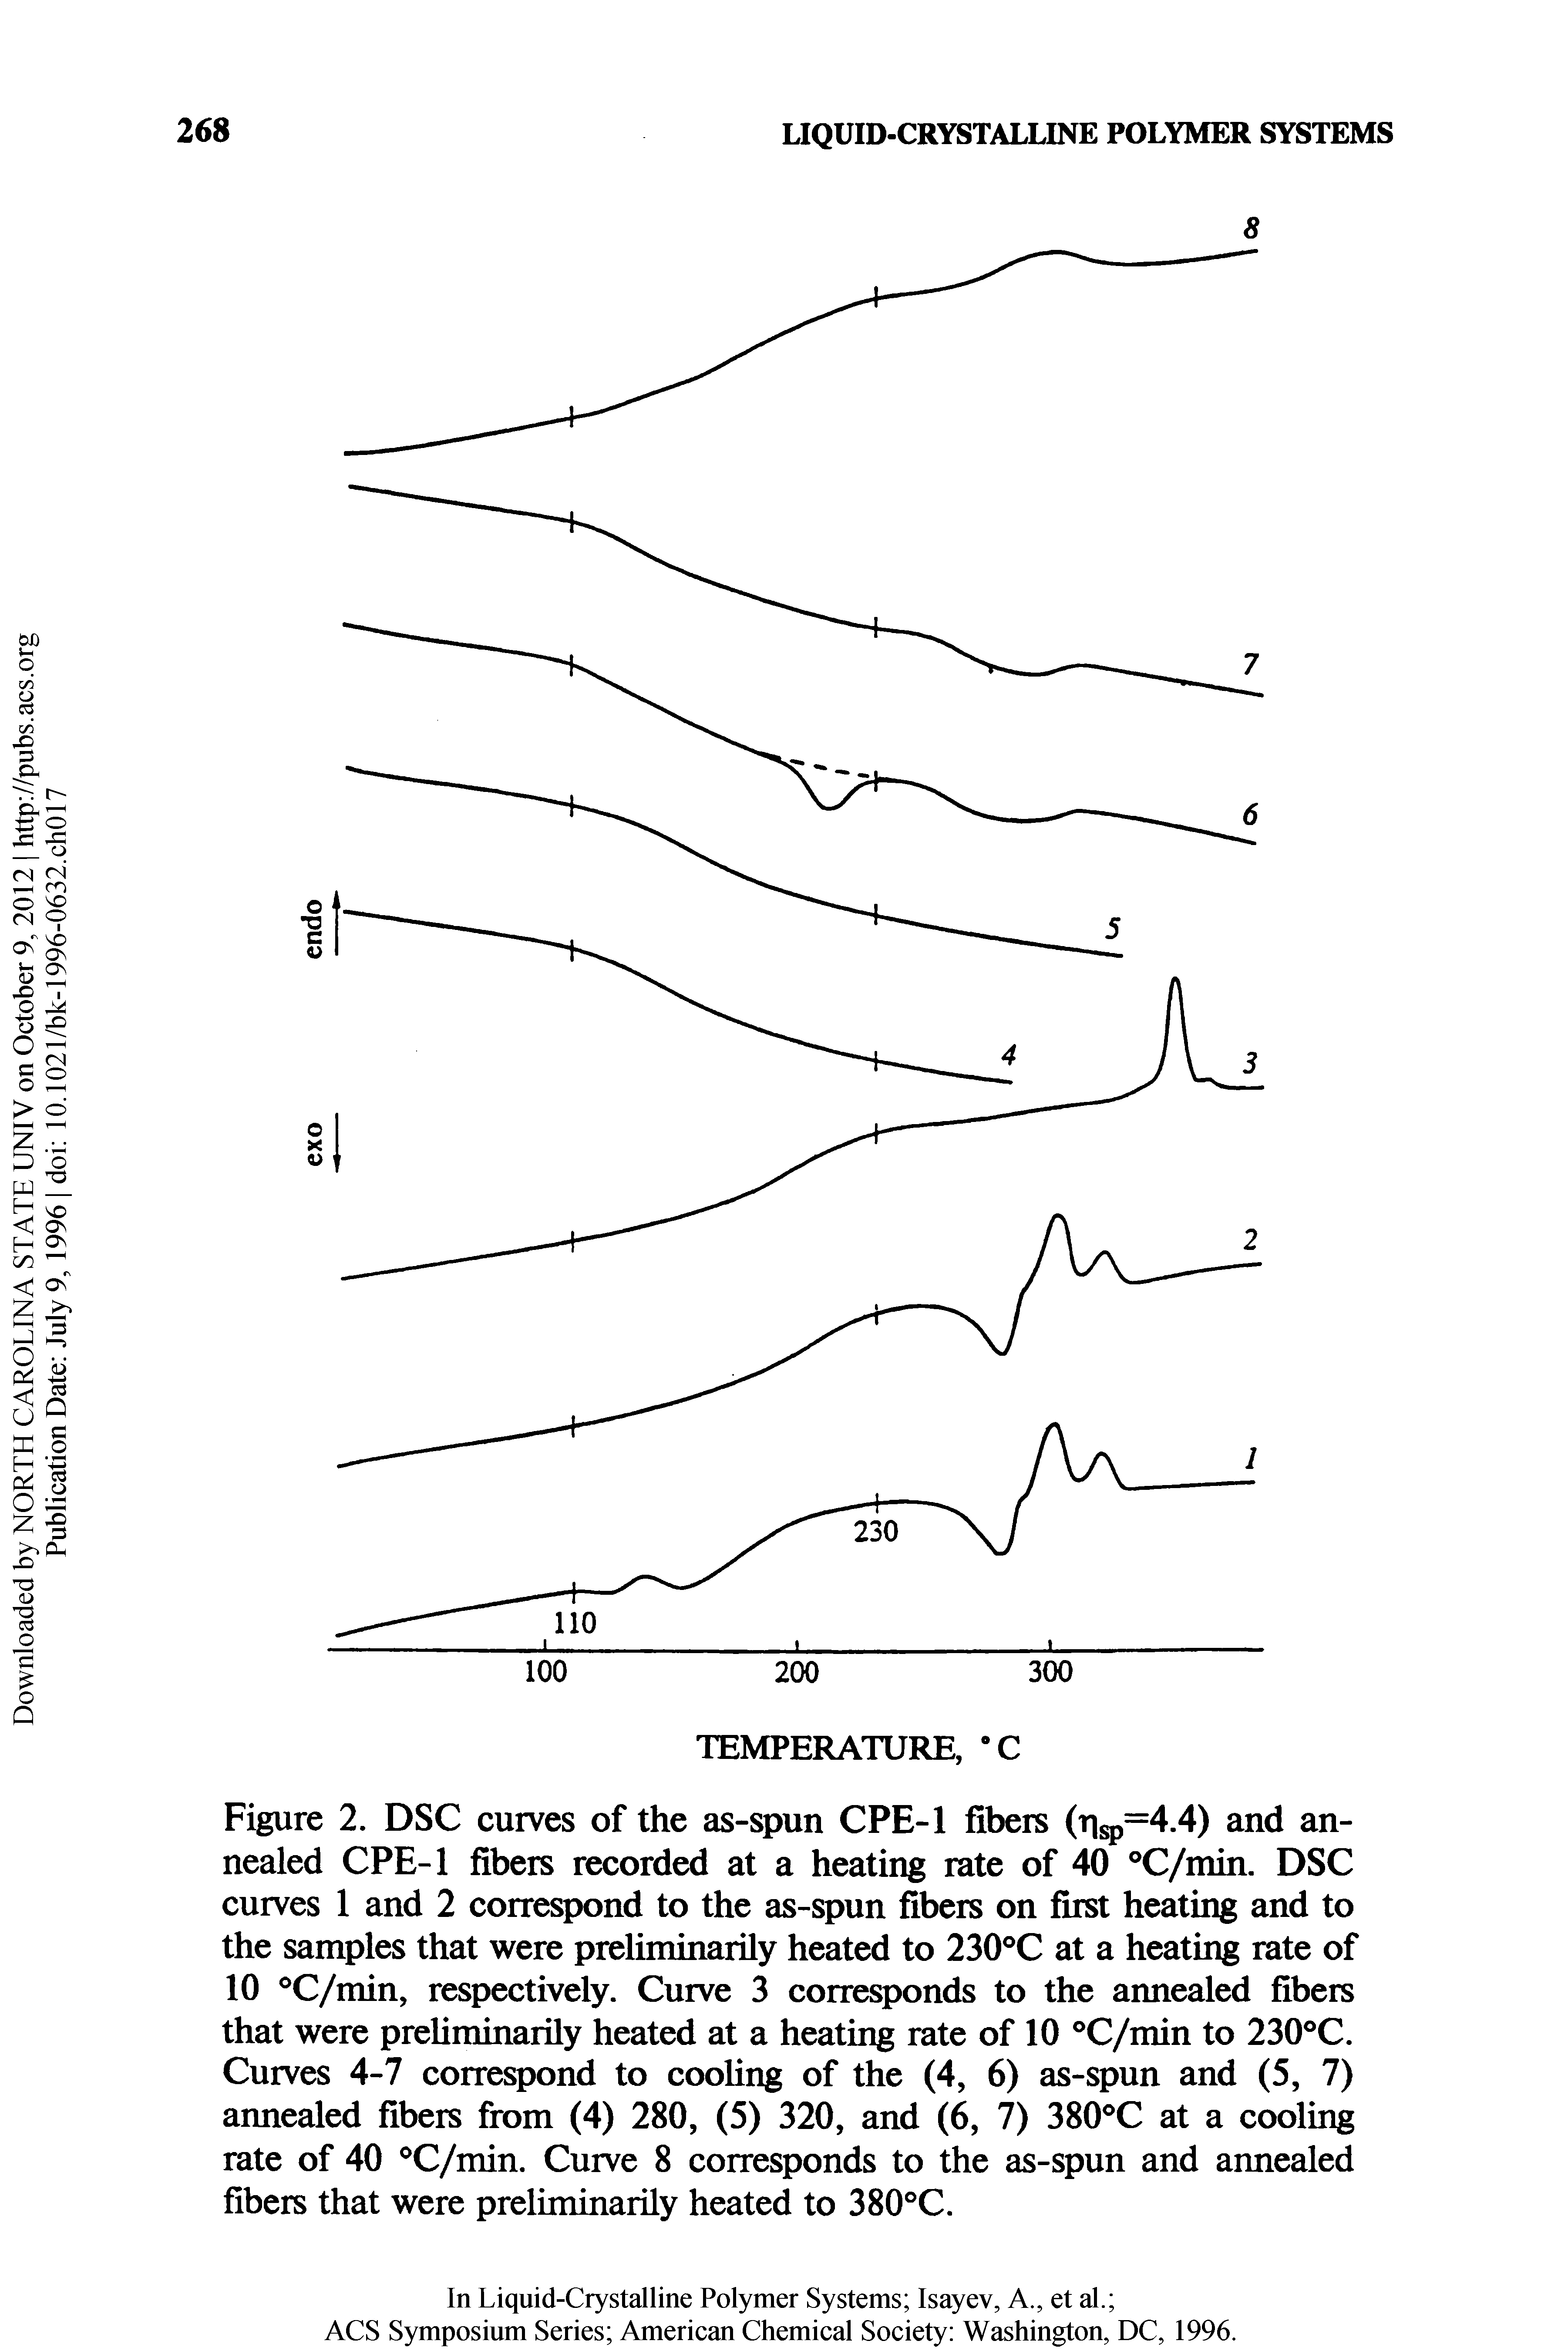 Figure 2. DSC curves of the as-spun CPE-1 fibers (iisp=4.4) and annealed CPE-1 fibers recorded at a heating rate of 40 C/min. DSC curves 1 and 2 correspond to the as-spun fibers on first heating and to the samples that were preliminarily heated to 230 C at a heating rate of 10 C/min, respectively. Curve 3 corresponds to the annealed fibers that were preUminarily heated at a heating rate of 10 C/min to 230 C. Curves 4-7 correspond to cooling of the (4, 6) as-spun and (5, 7) annealed fibers from (4) 280, (5) 320, and (6, 7) 380 C at a cooling rate of 40 C/min. Curve 8 corresponds to the as-spun and atmealed fibers that were preliminarily heated to 380°C.